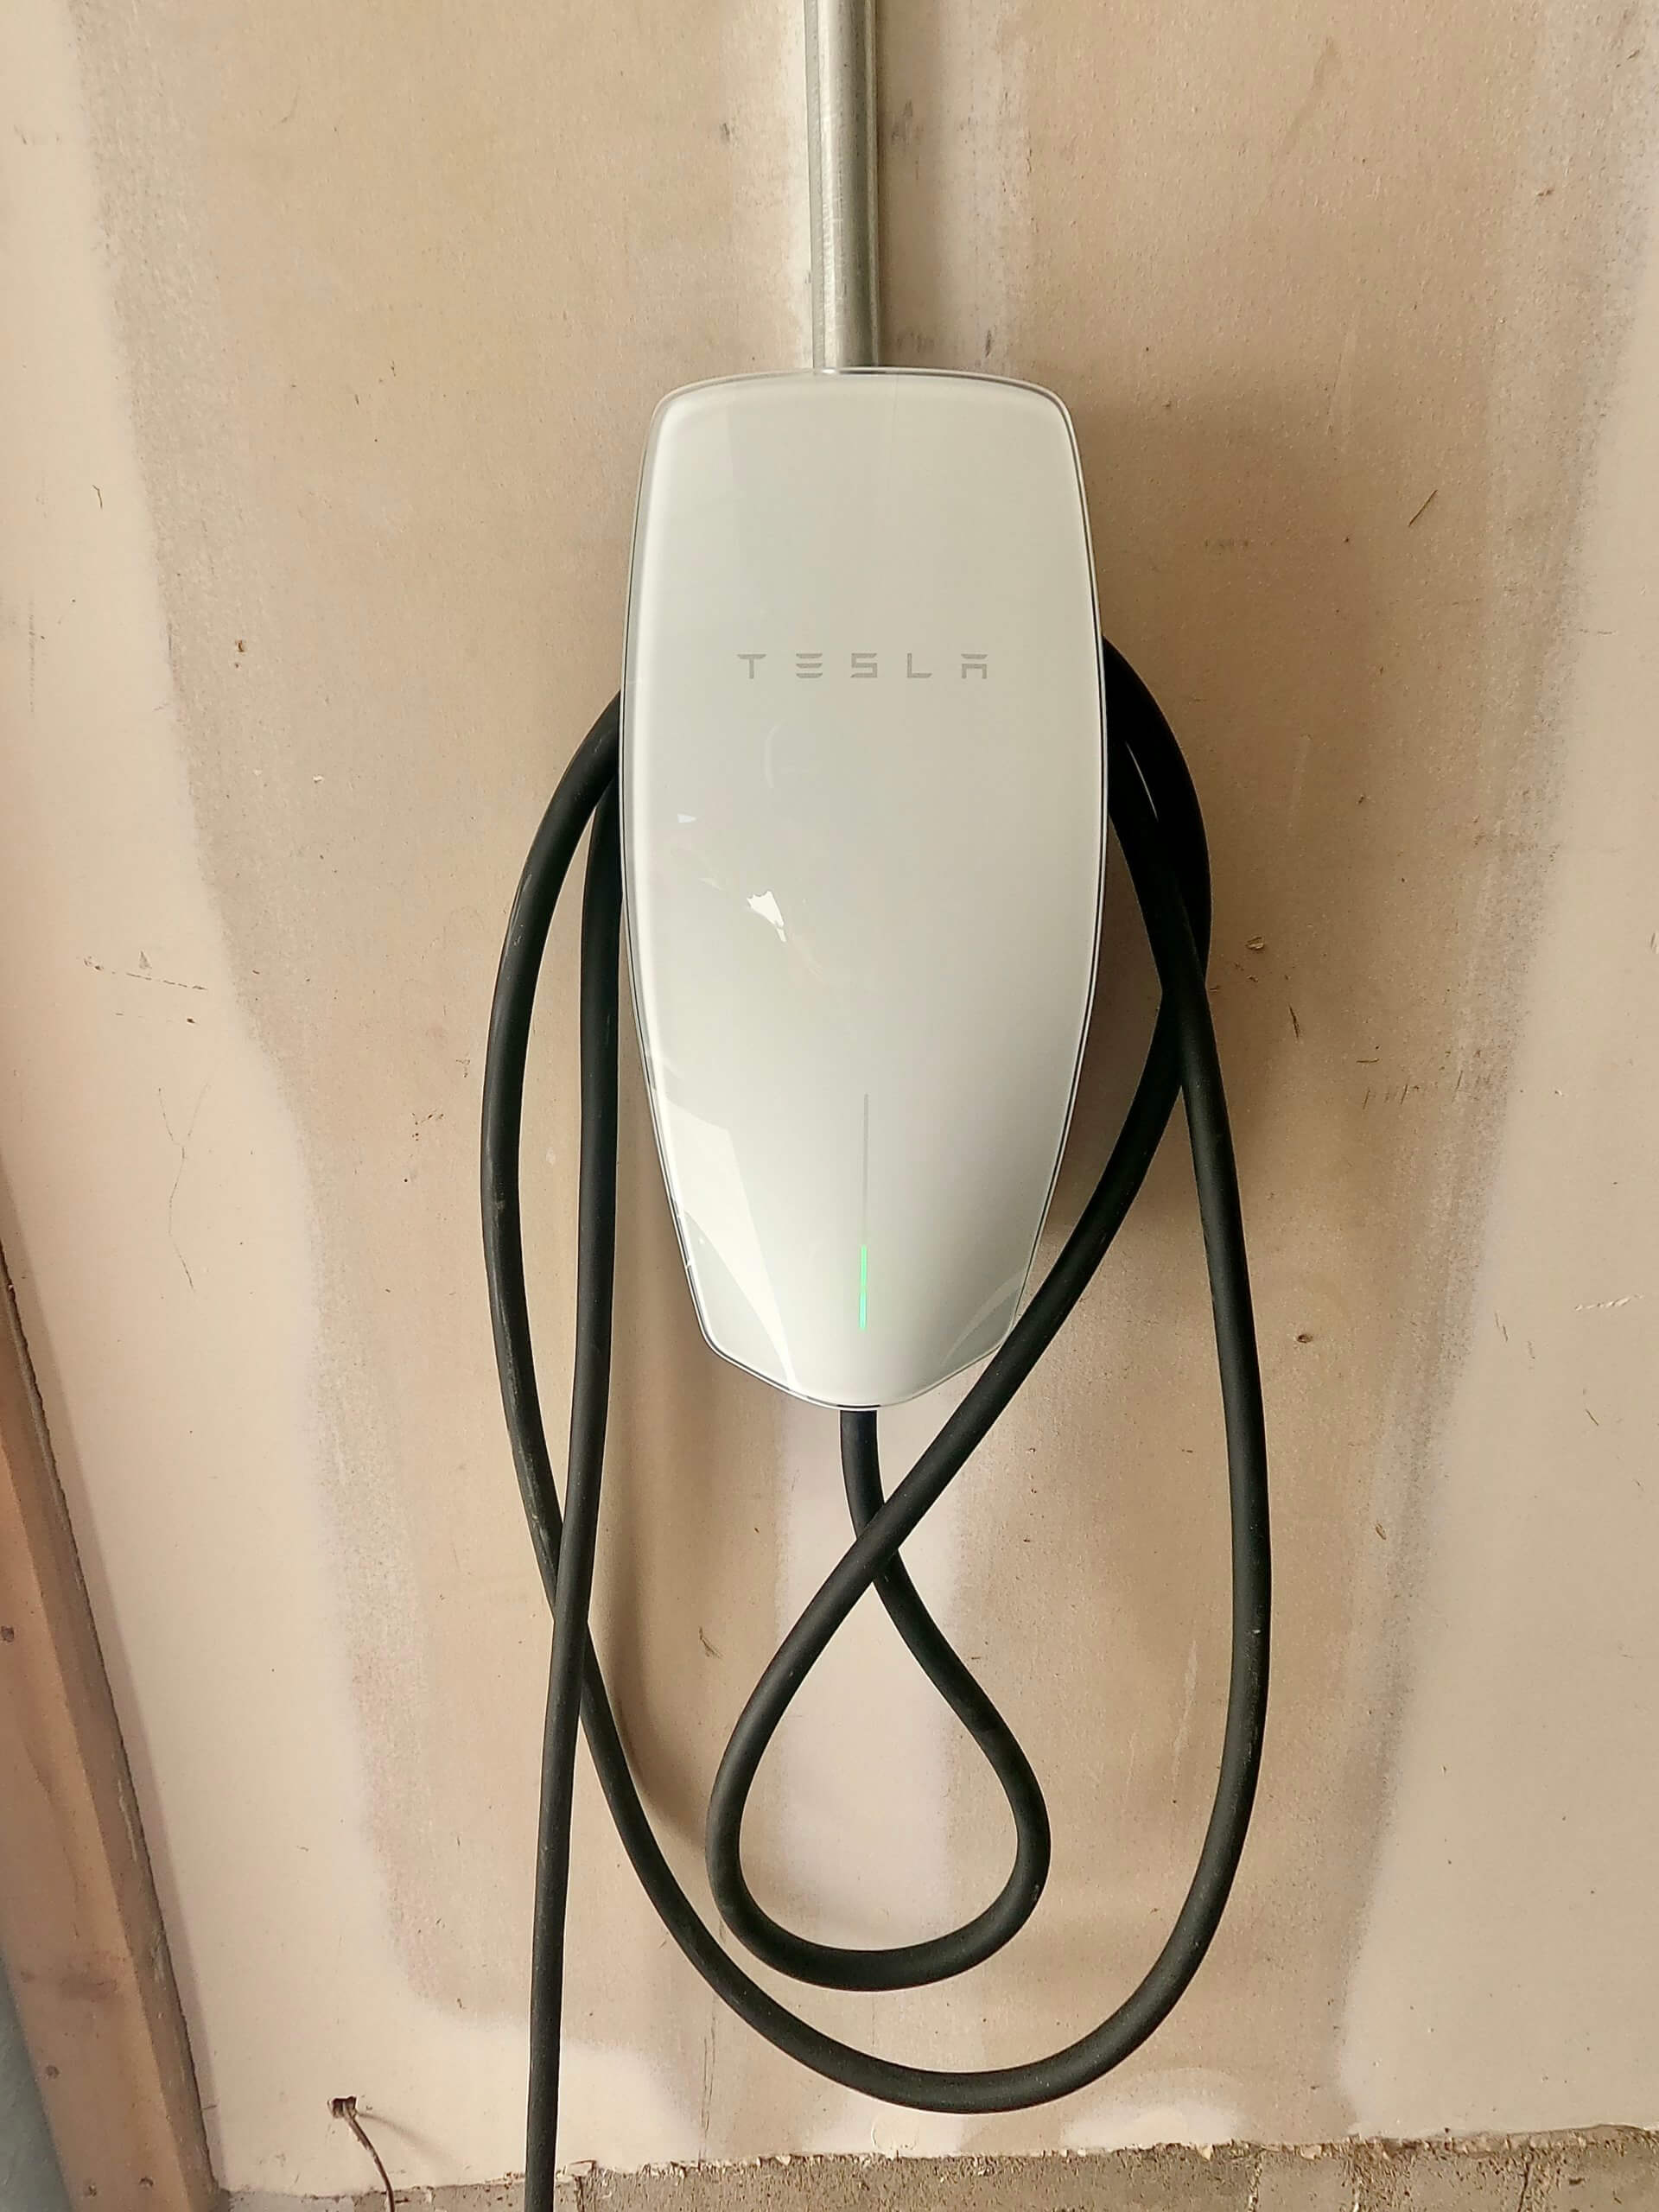 Tesla Level 2 Car Charger installed at home